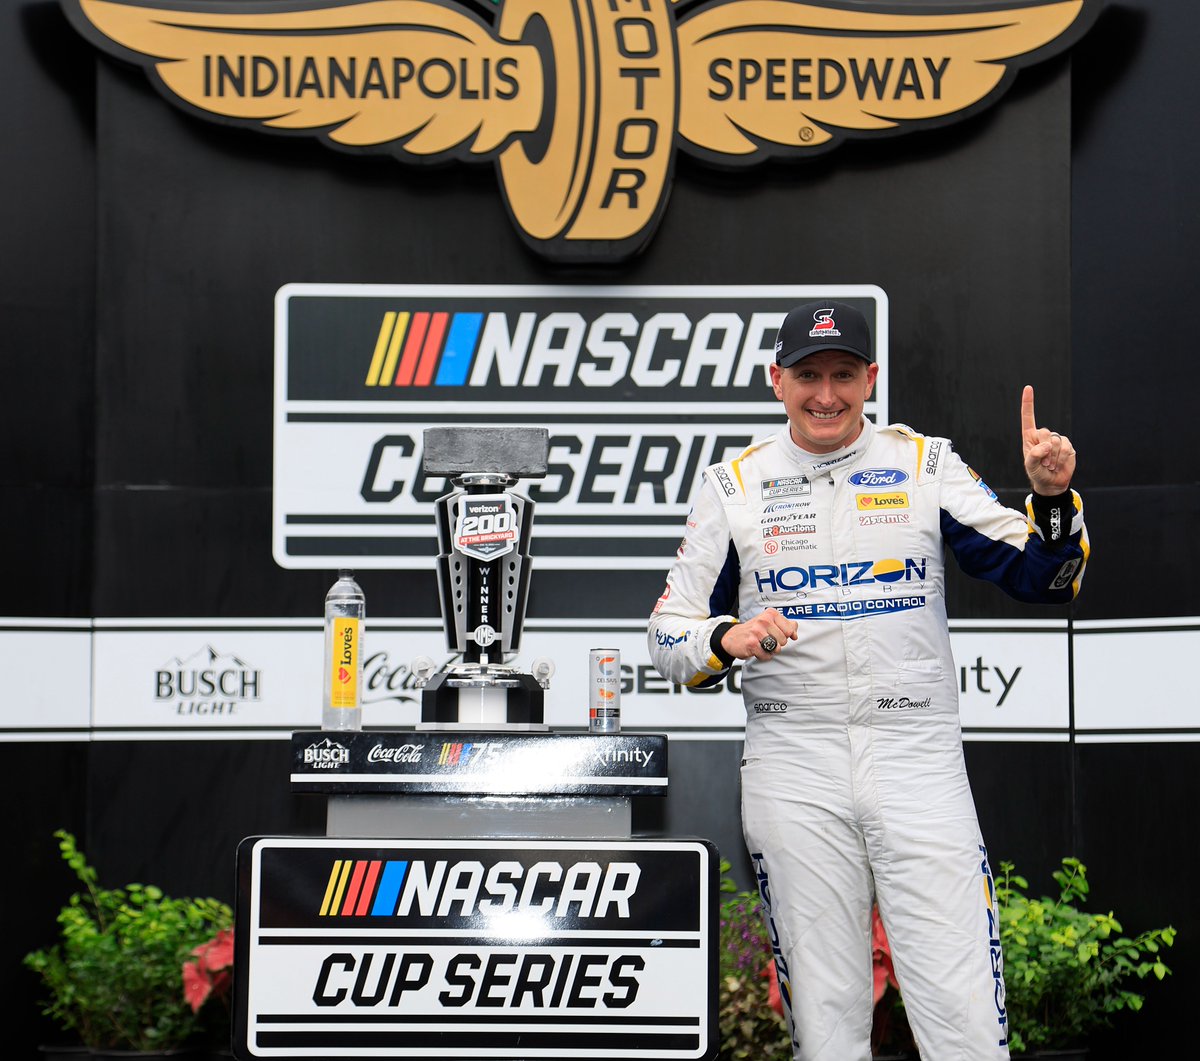 On Sunday, Michael (@Mc_Driver) McDowell of the @SafetyKleen serviced @Team_FRM took home the @IMS road course win with Performance Plus oil under his hood. Congrats, all!